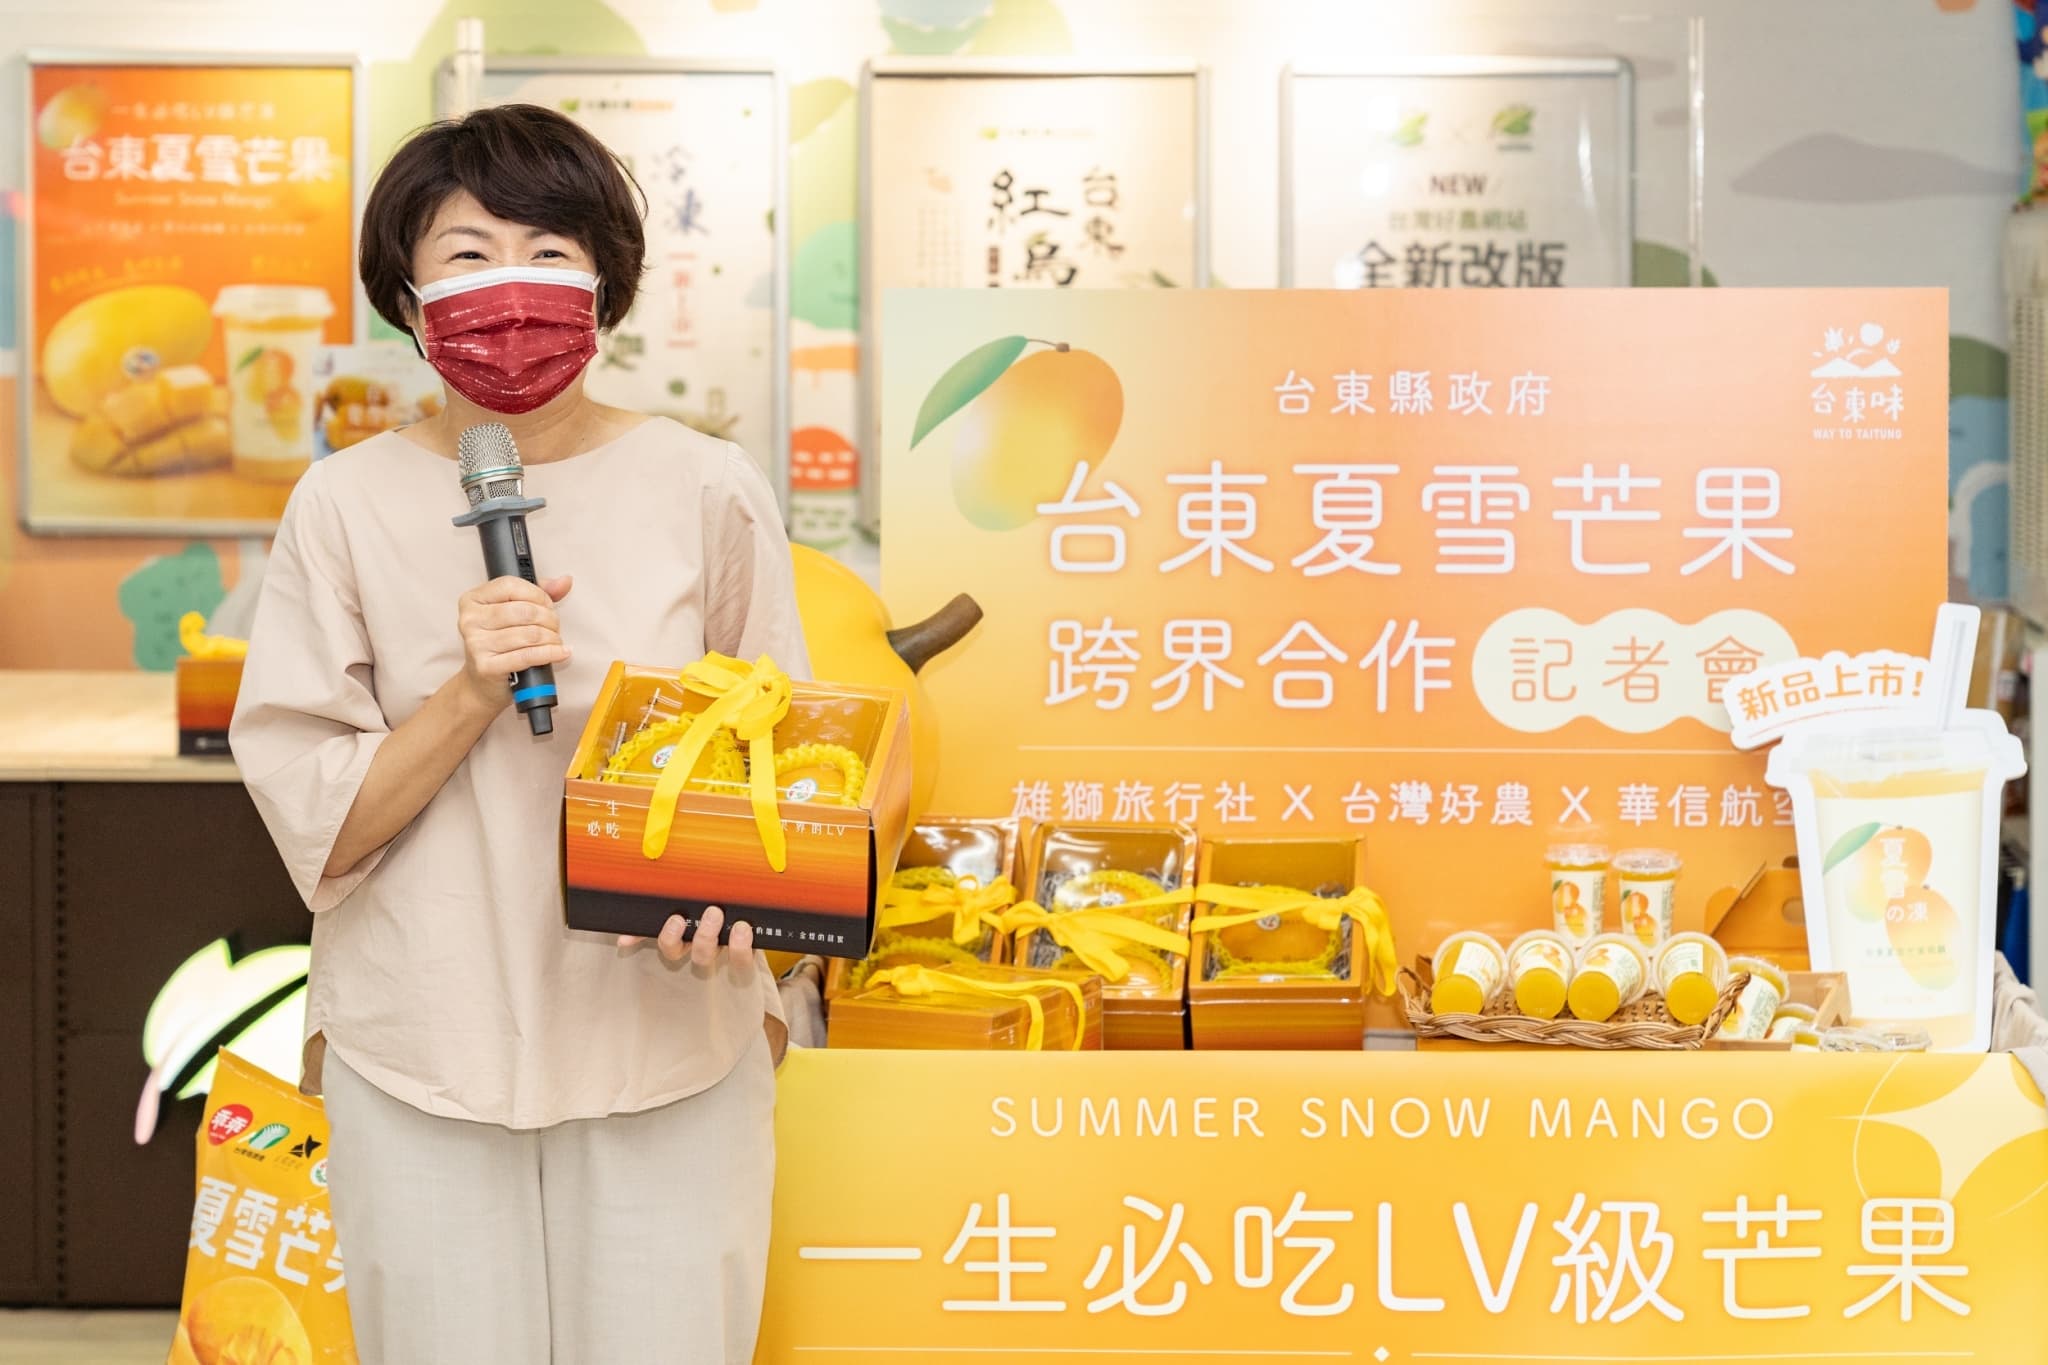 Collaboration with Air, Land, Travel, and Transport Operations to promote Taitung’s XiaXue Mango: Taste the decadent flavors of XiaXue Mangoes this hot summer.